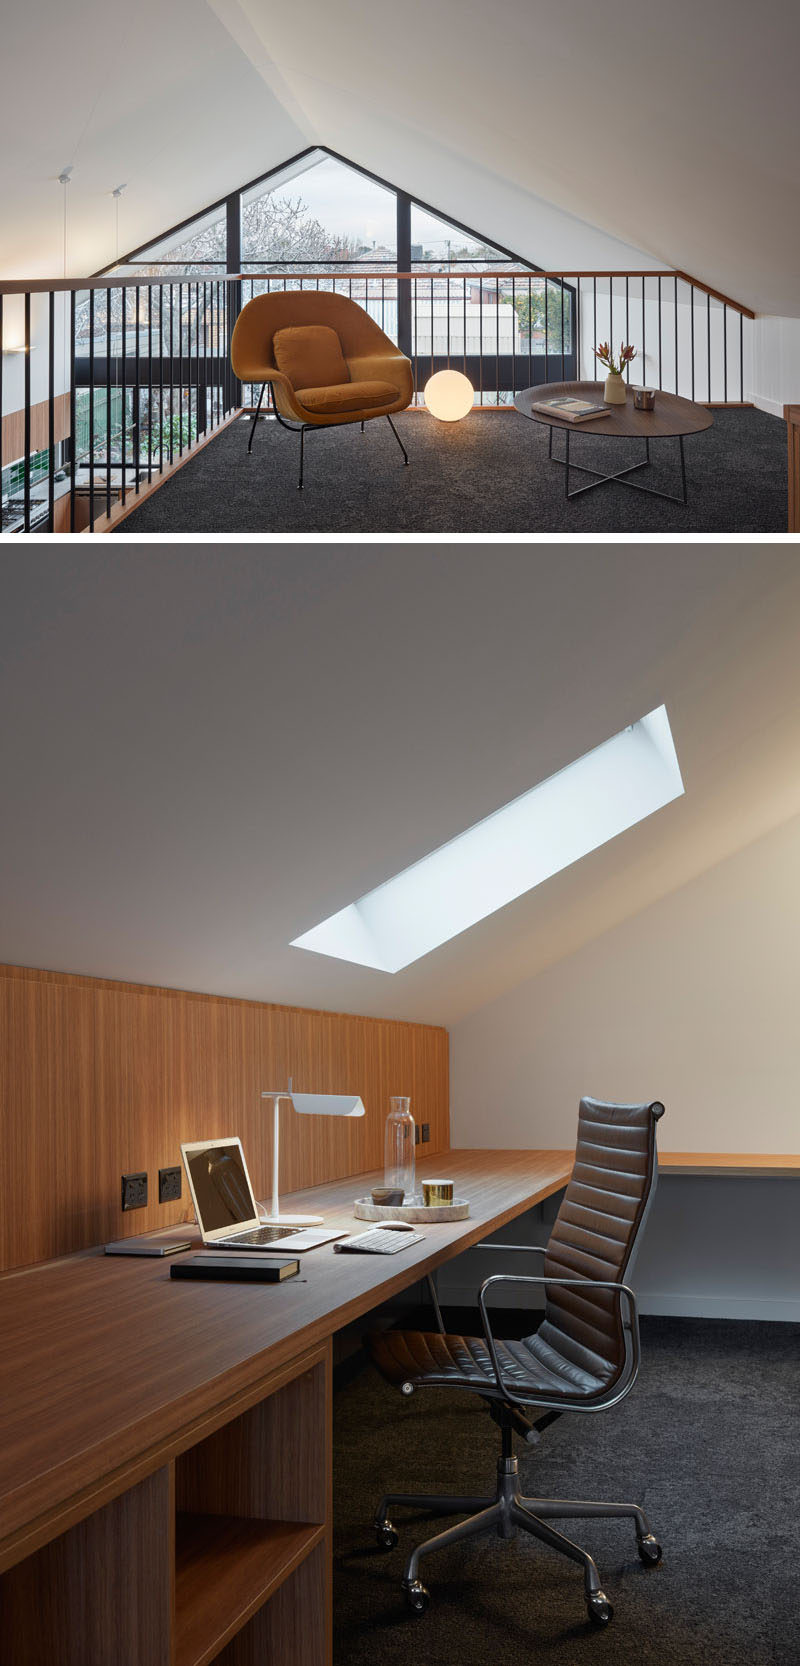 This modern house extension features a mezzanine set up as a study with a built-in desk and skylight.